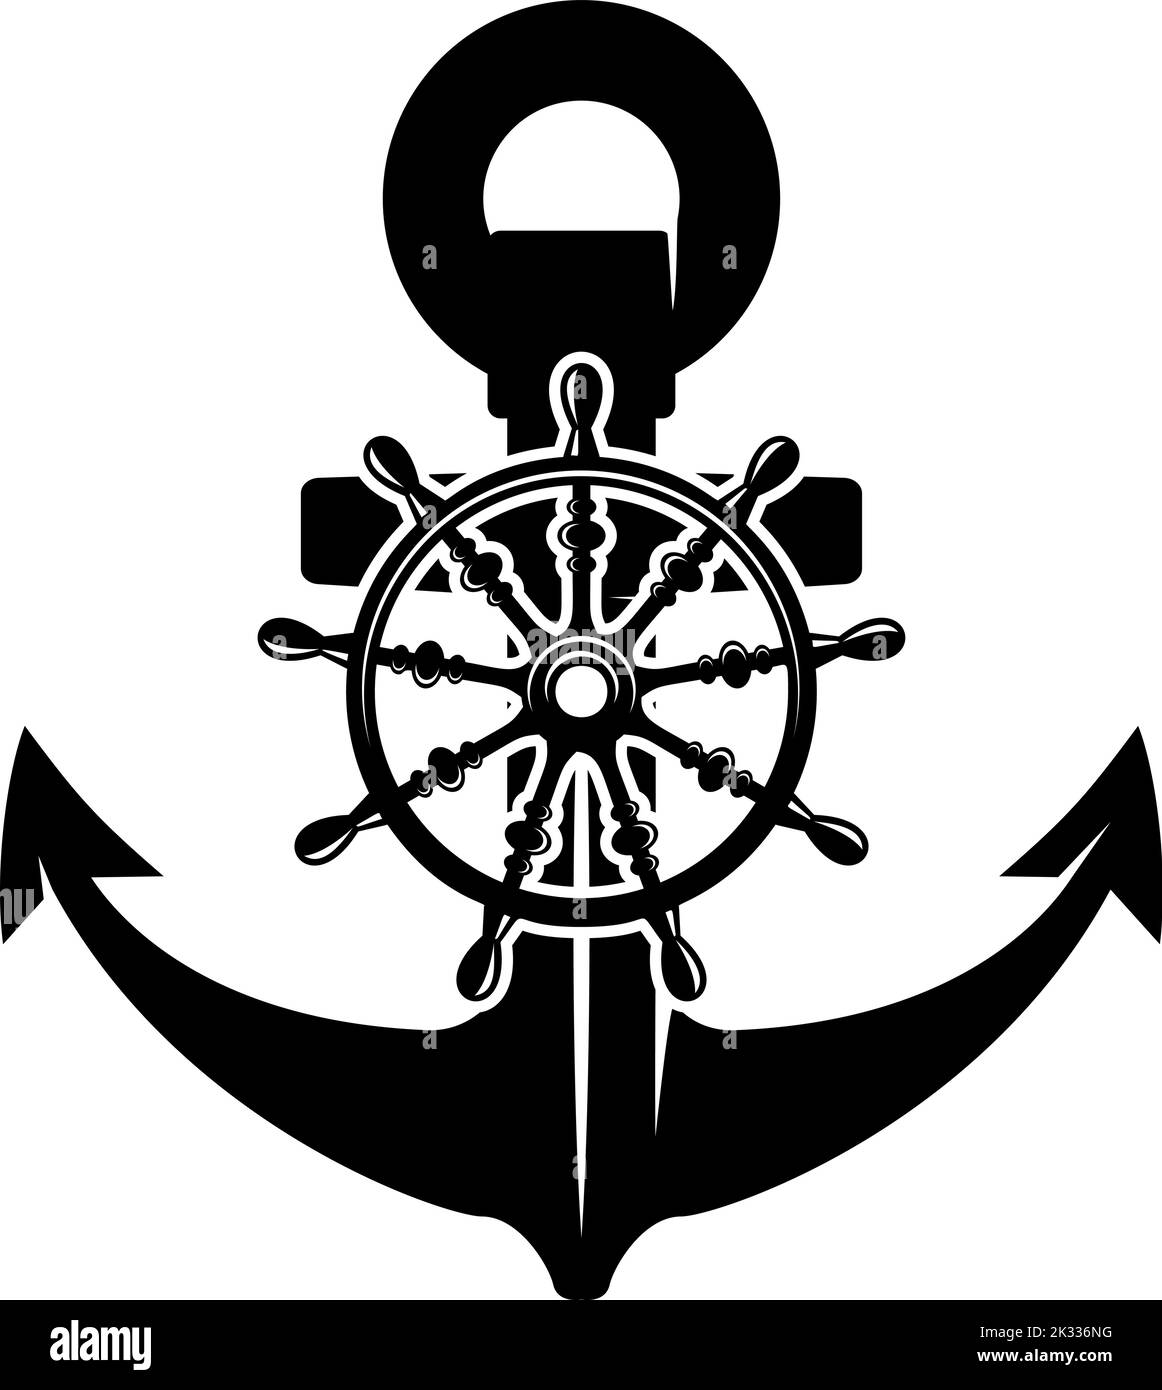 Illustration of an anchor with ship steering wheel in monochrome style. Design element for poster, card, banner, emblem, sign. Vector illustration Stock Vector